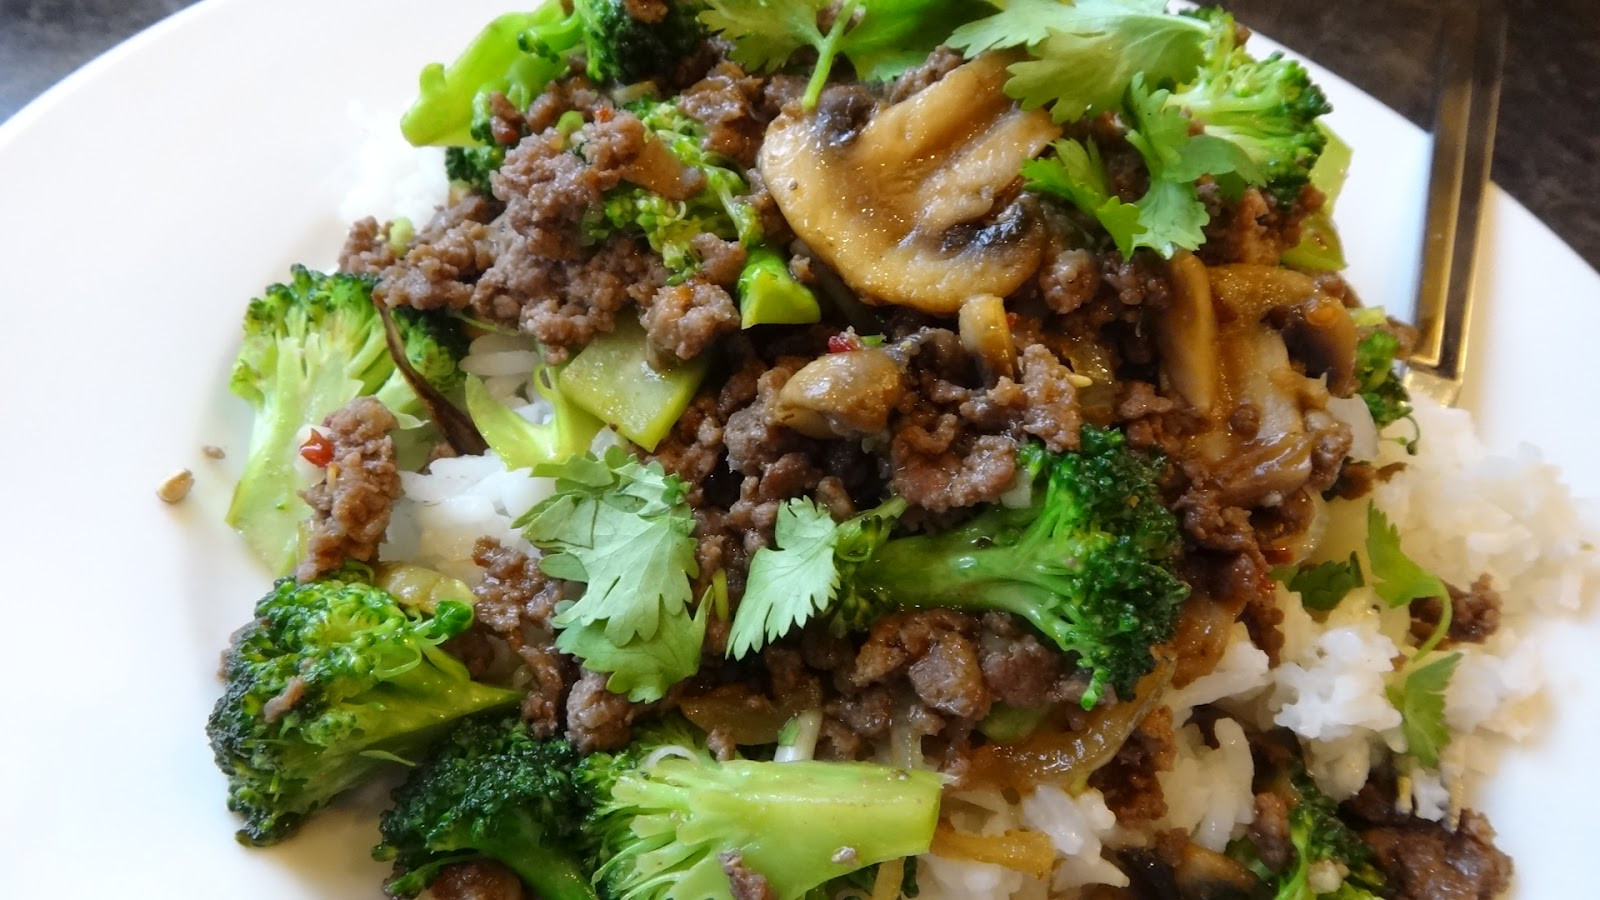 Broccoli Beef Stir Fry
 I want to cook that Beef and Broccoli Stir Fry